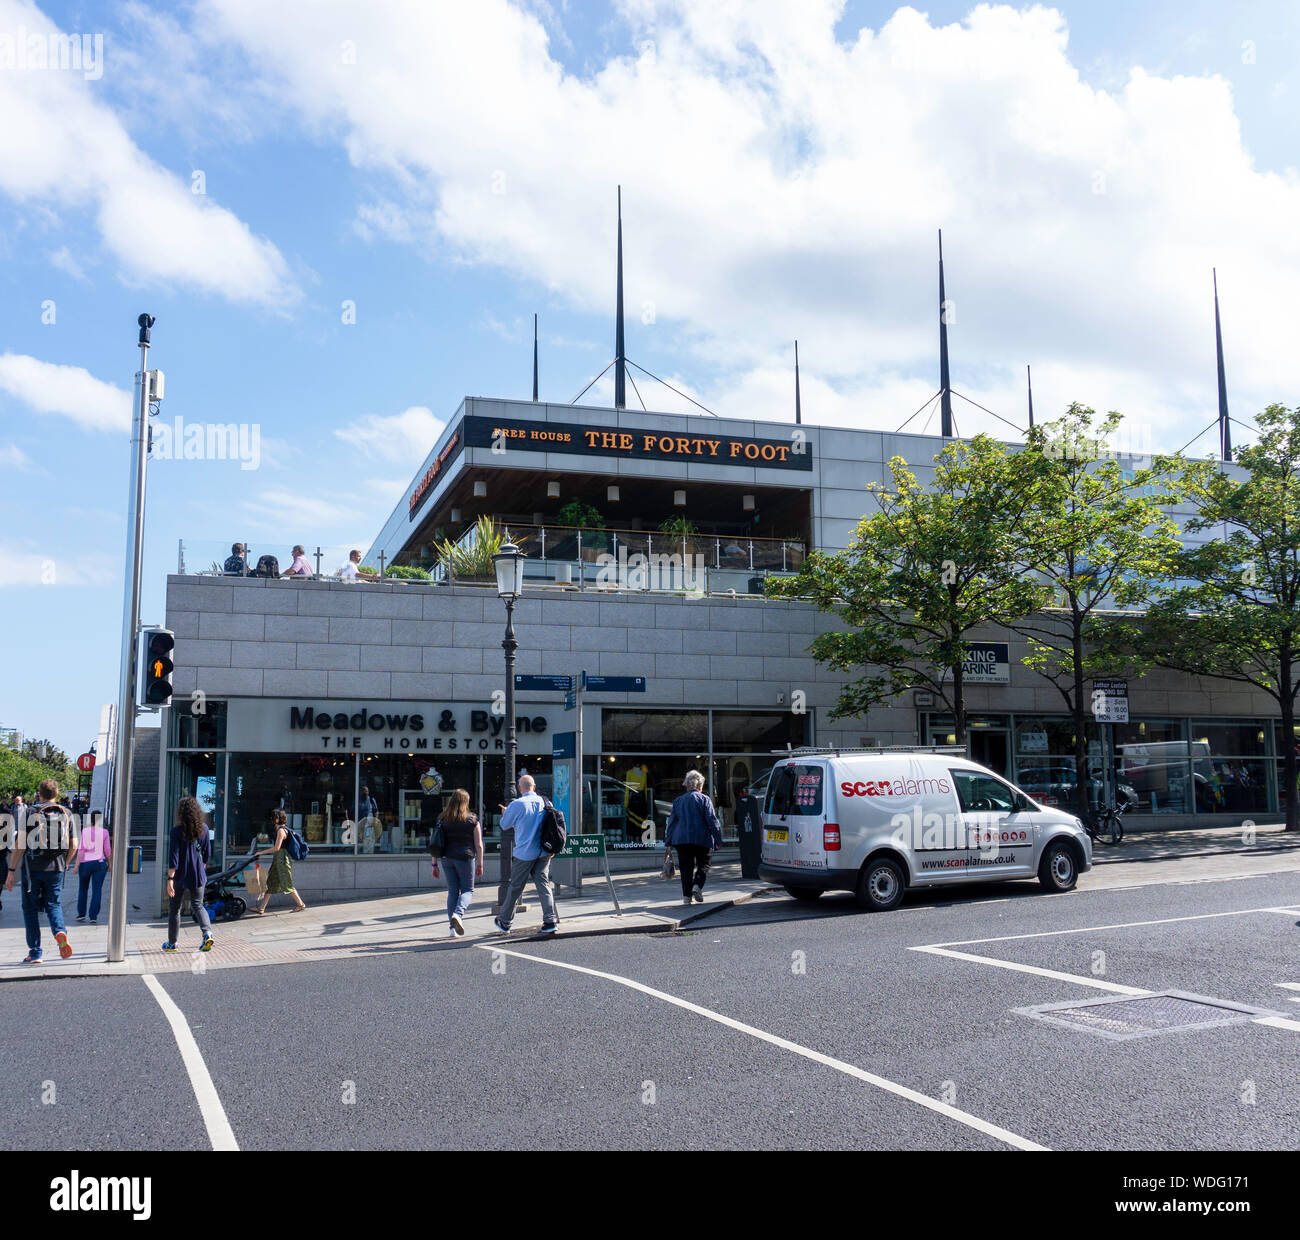 The Forty Foot Pub, a Wetherspoon Pub, above the Meadows and Byrne Homestore in Dun Laoghaire,Dublin,Ireland. Stock Photo